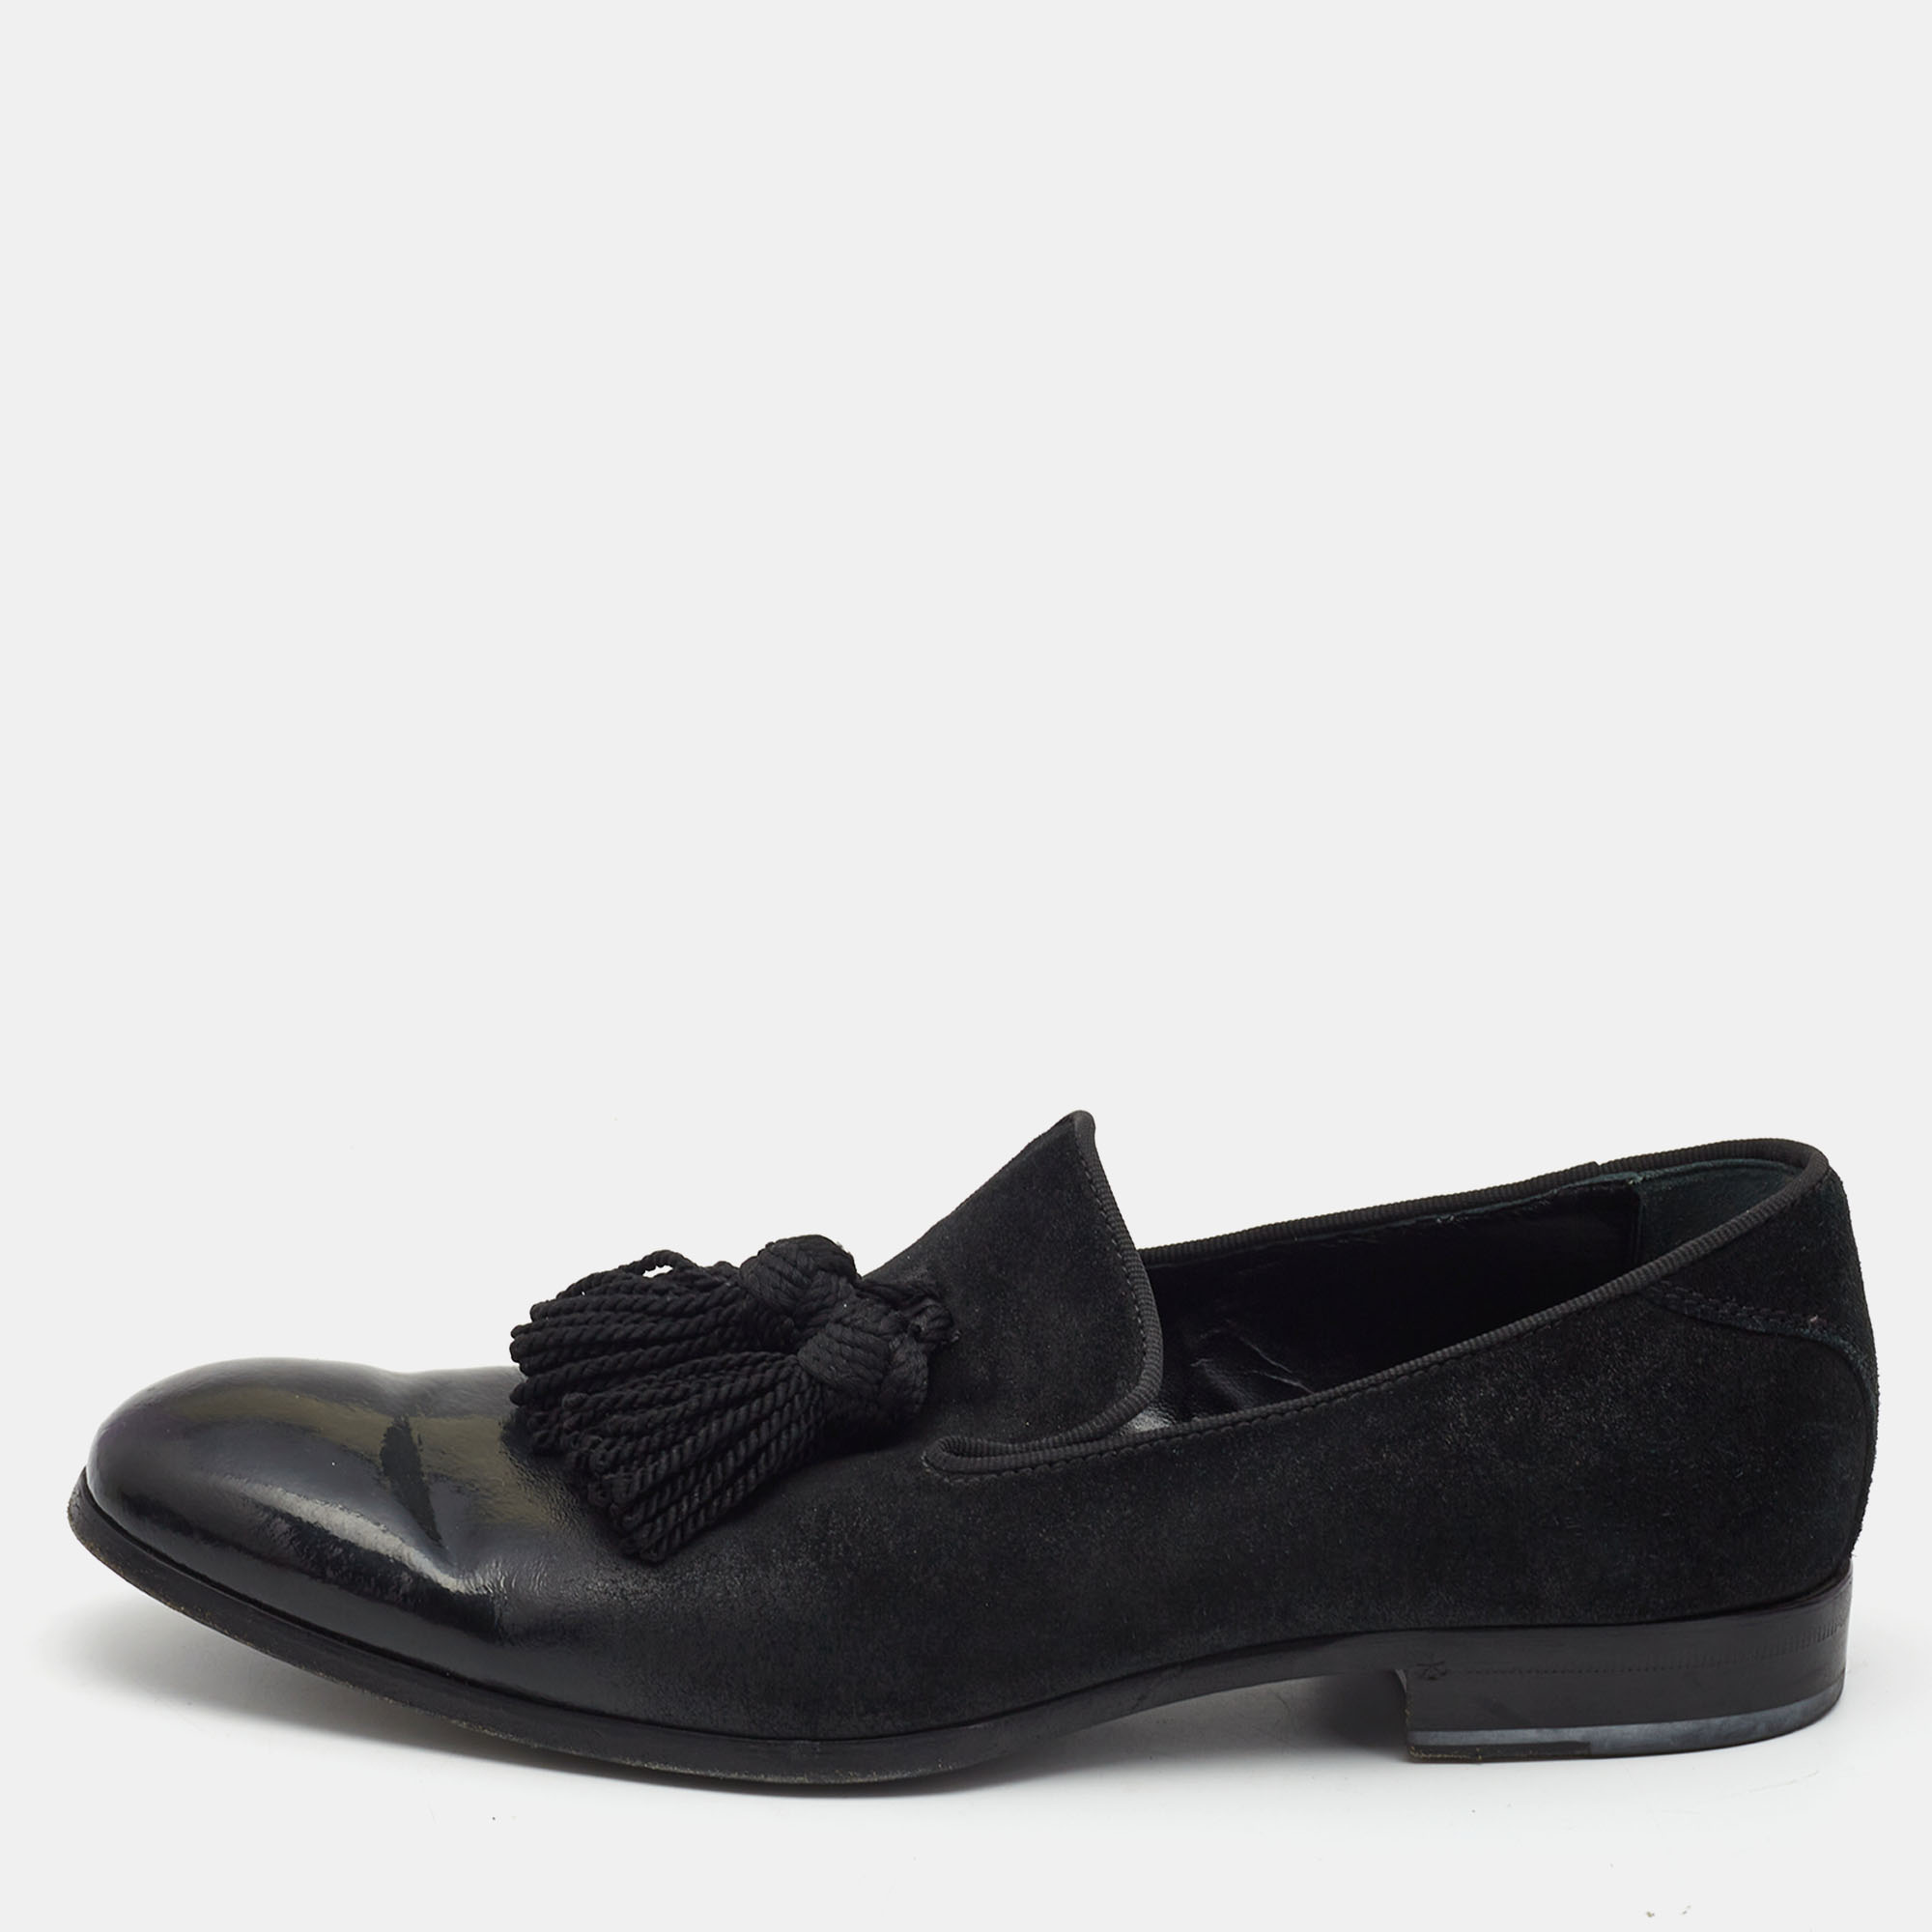 

Jimmy Choo Black Suede and Leather Foxley Tassel Loafers Size